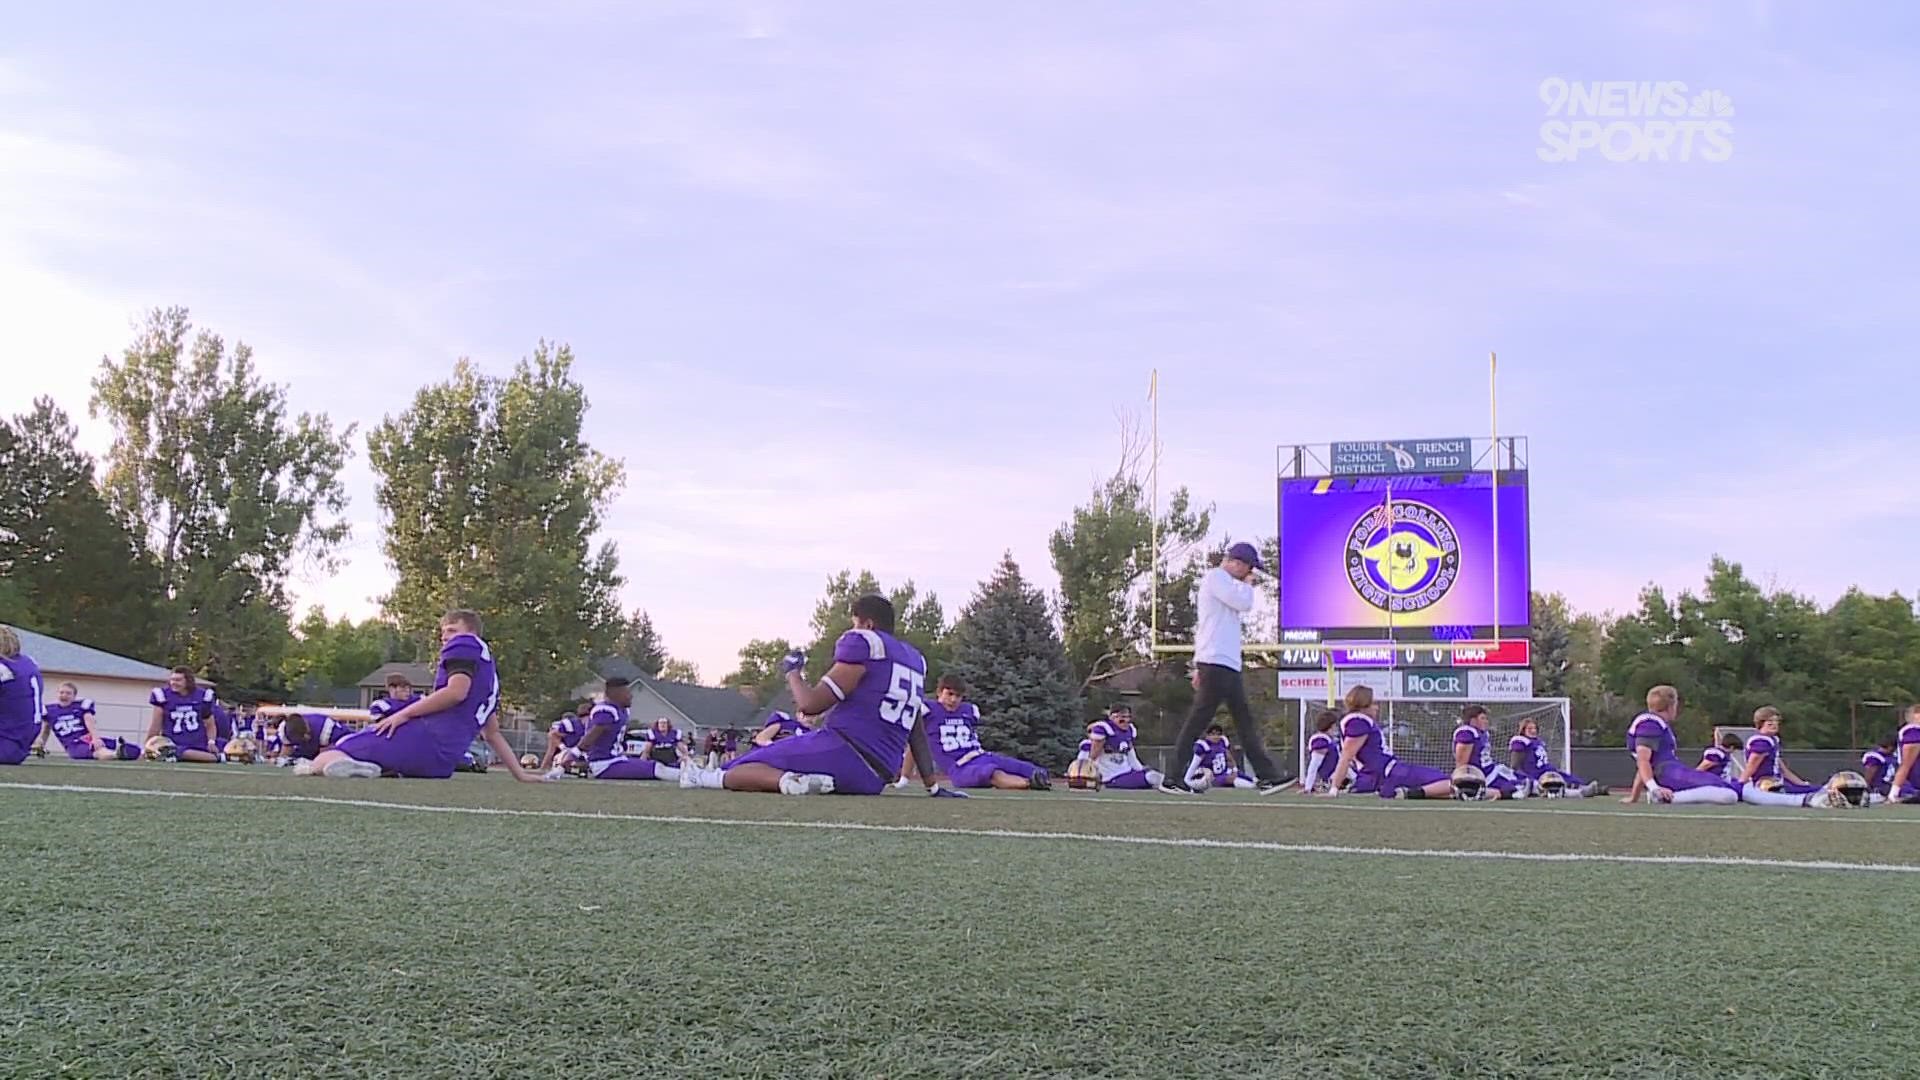 The Lobos trailed the Lambkins 24-17 late in the fourth quarter before a TD and two-point conversion in the final seconds helped Rocky Mountain steal a 25-24 win.